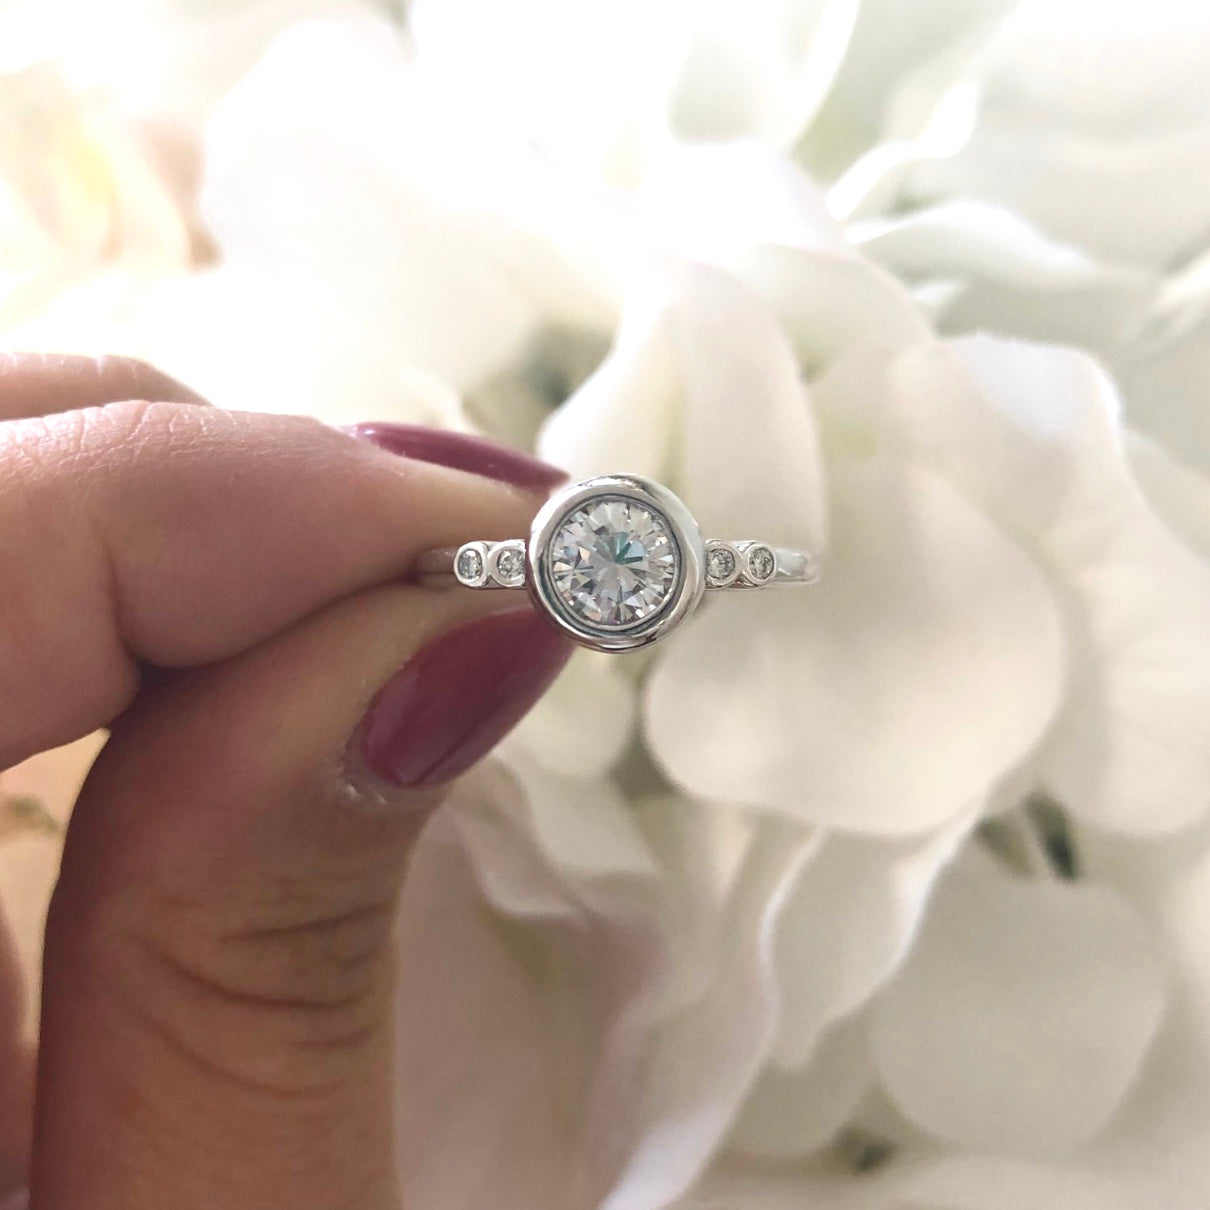 Unique Diamond Bezel Channel Set Engagement Ring - with A 3 ct Center Round Cut GIA Natural Diamond in White Gold